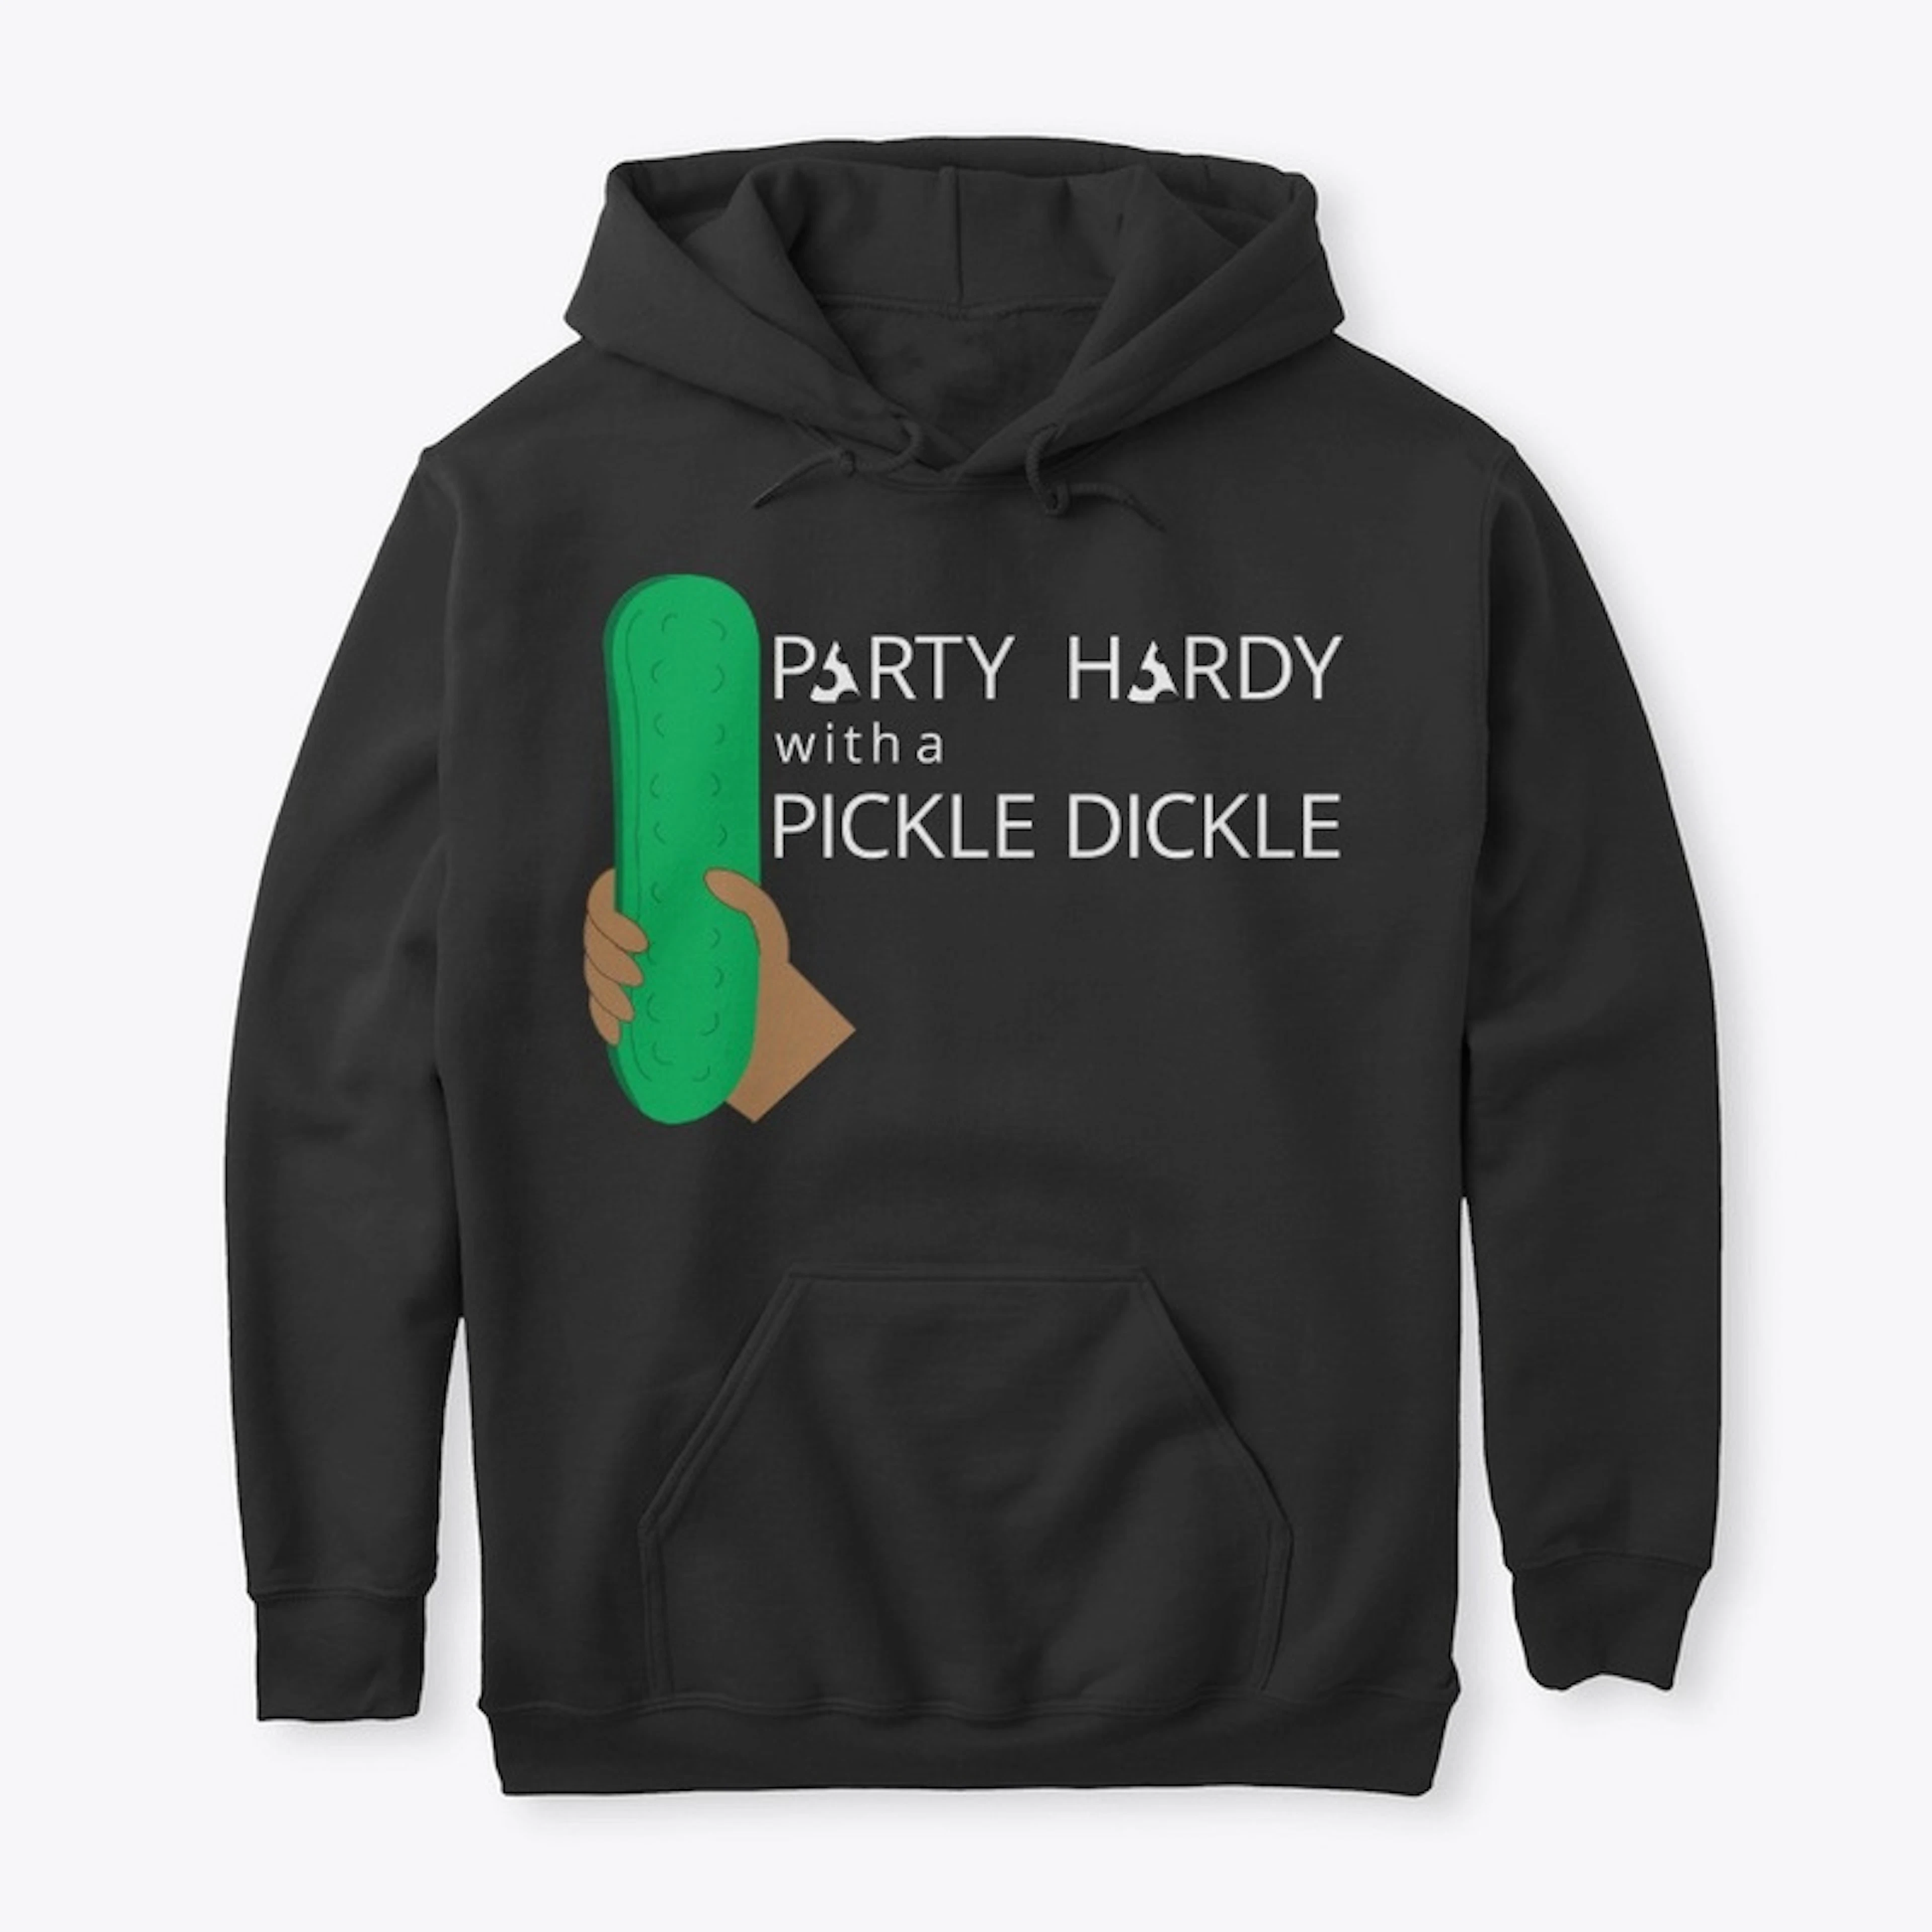 Party Hardy with a Pickle Dickle (Black)